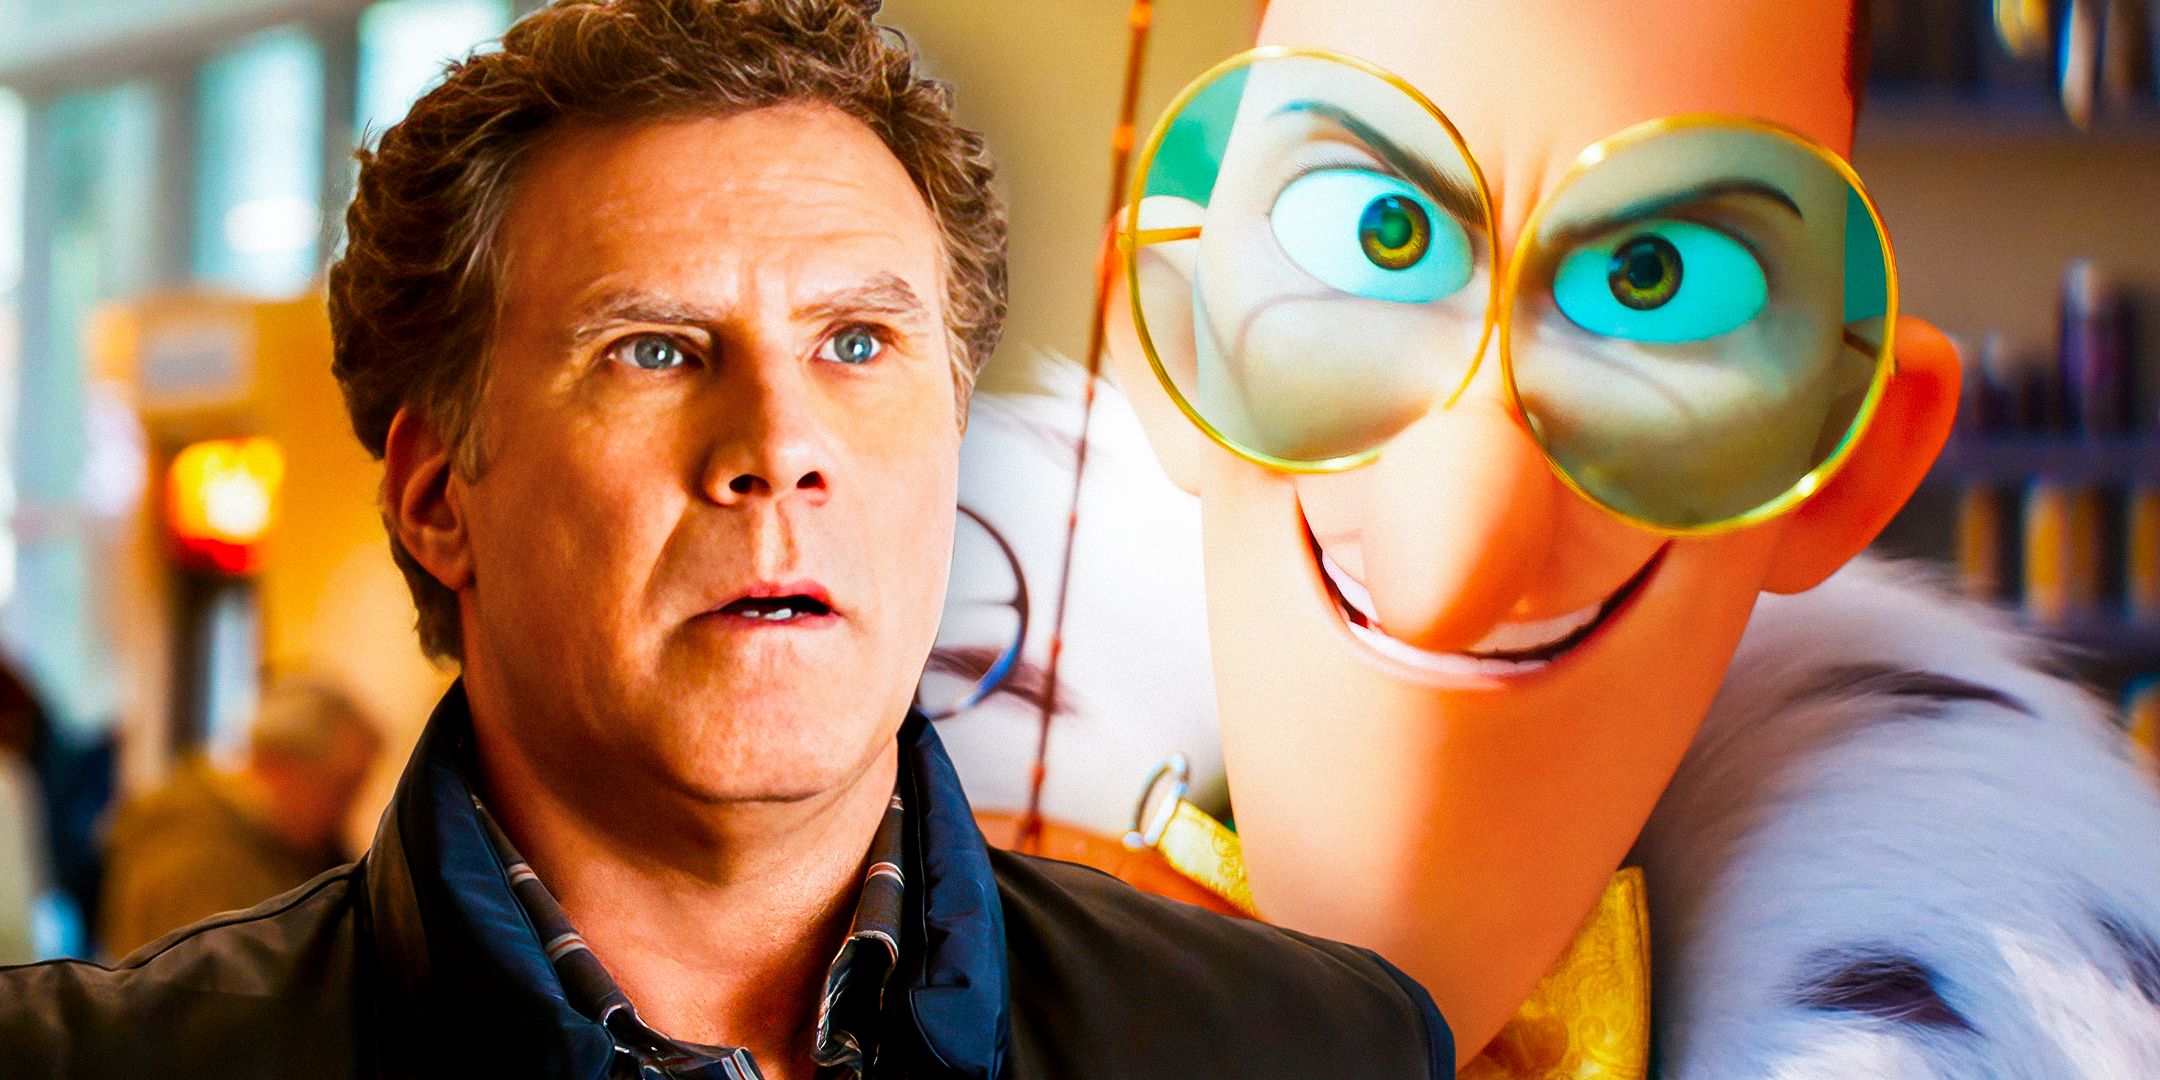 Will Ferrell from Daddy's Home 2 next to Maxime Le Mal from Despicable Me 4